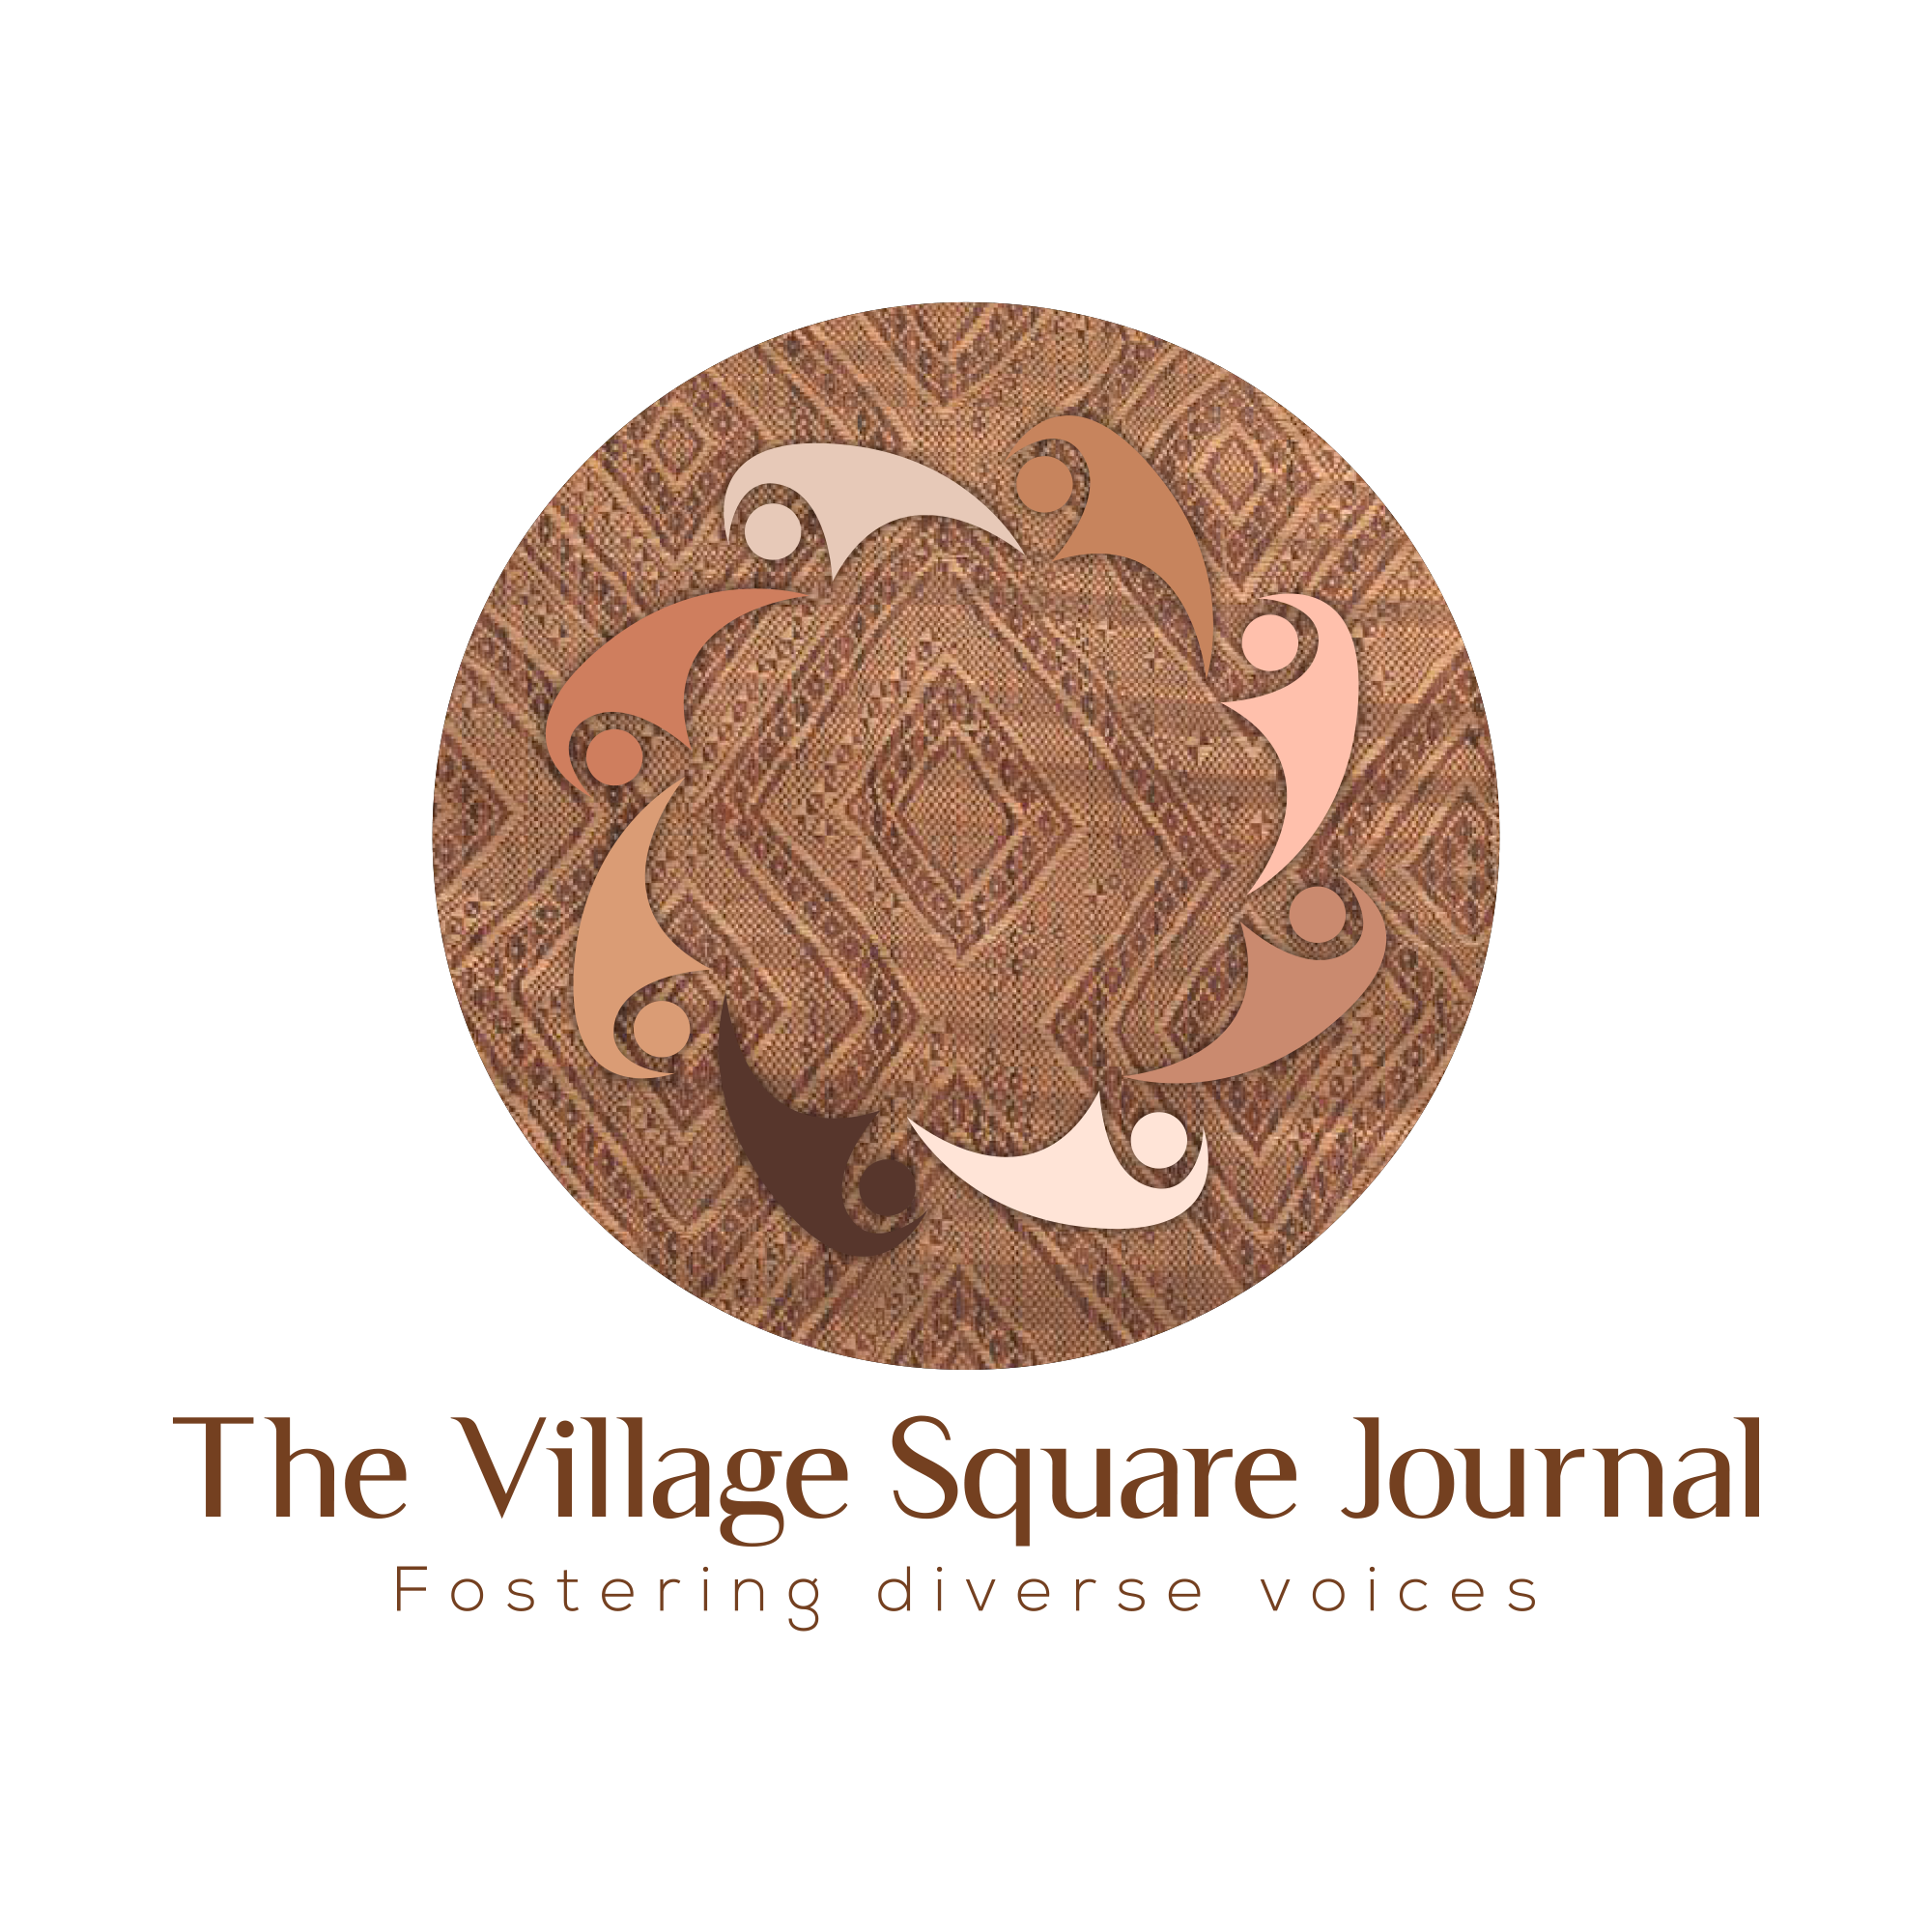 New Literary and Political Journal Alert: The Village Square Journal